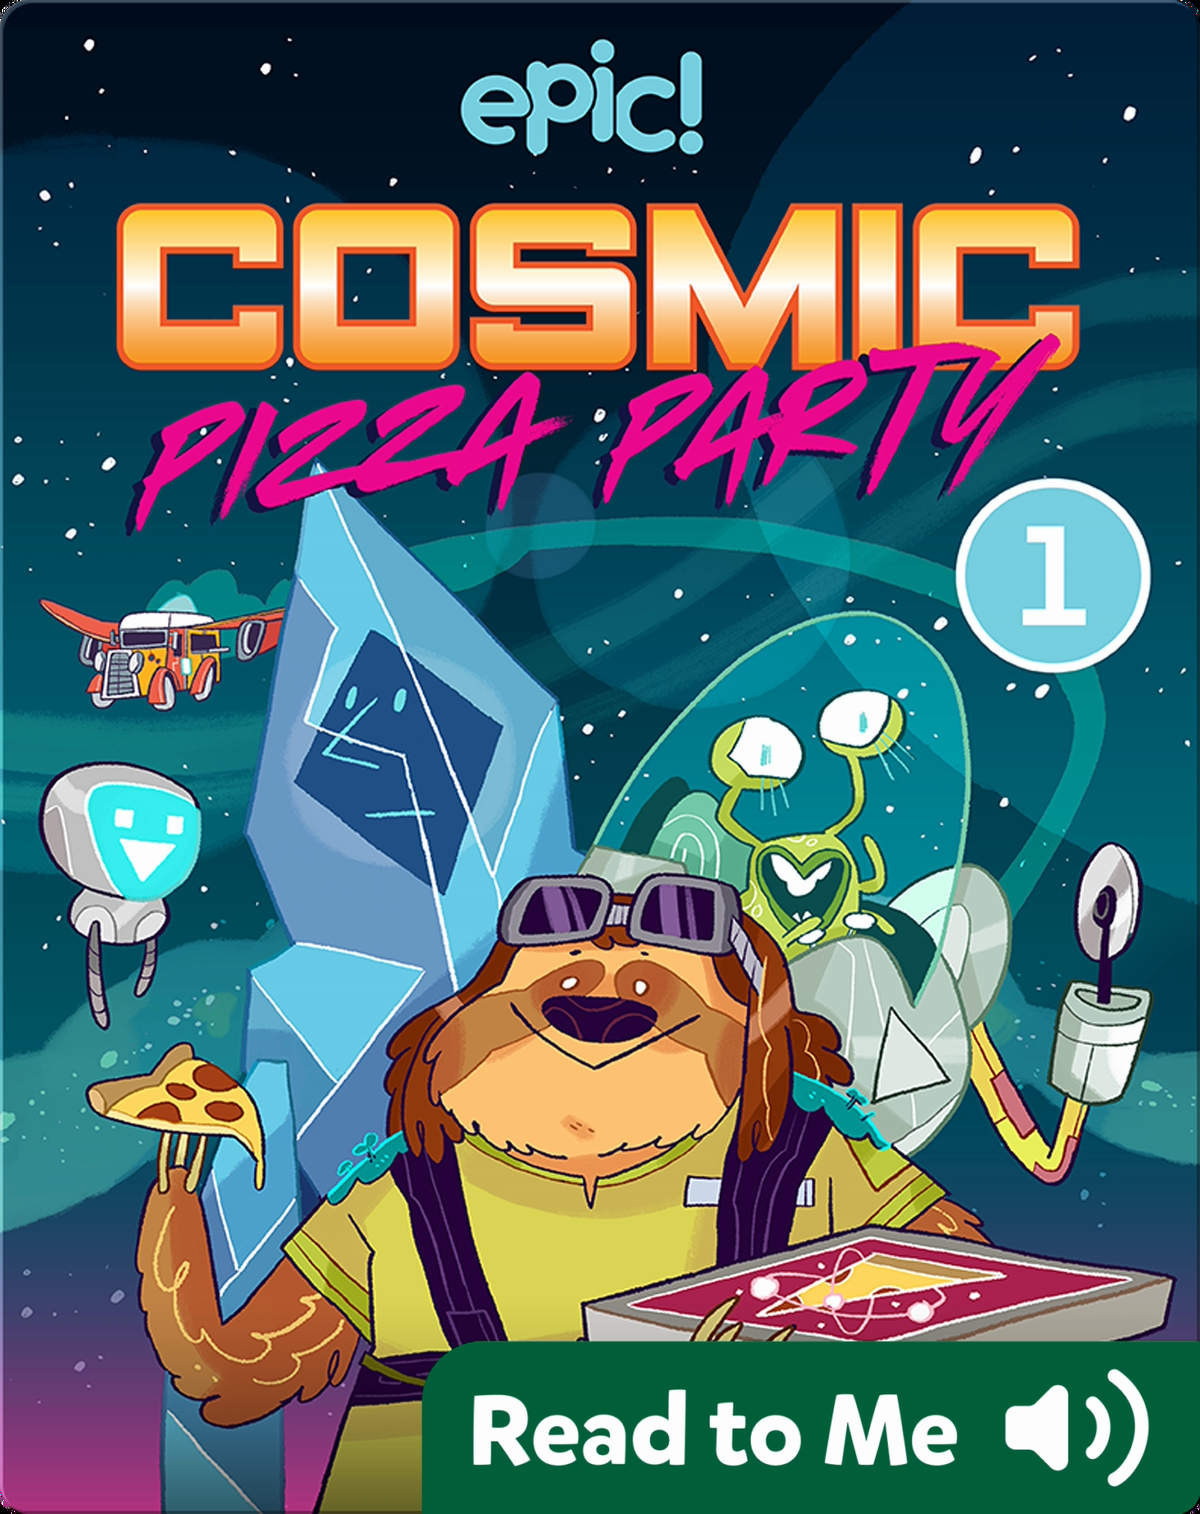 Cosmic Pizza Party Book 1 Nothing To Cheese At Children S Book By Nick Murphy Paul Ritchey With Illustrations By Bea Tormo Discover Children S Books Audiobooks Videos More On Epic - how to participate in pizza party roblox